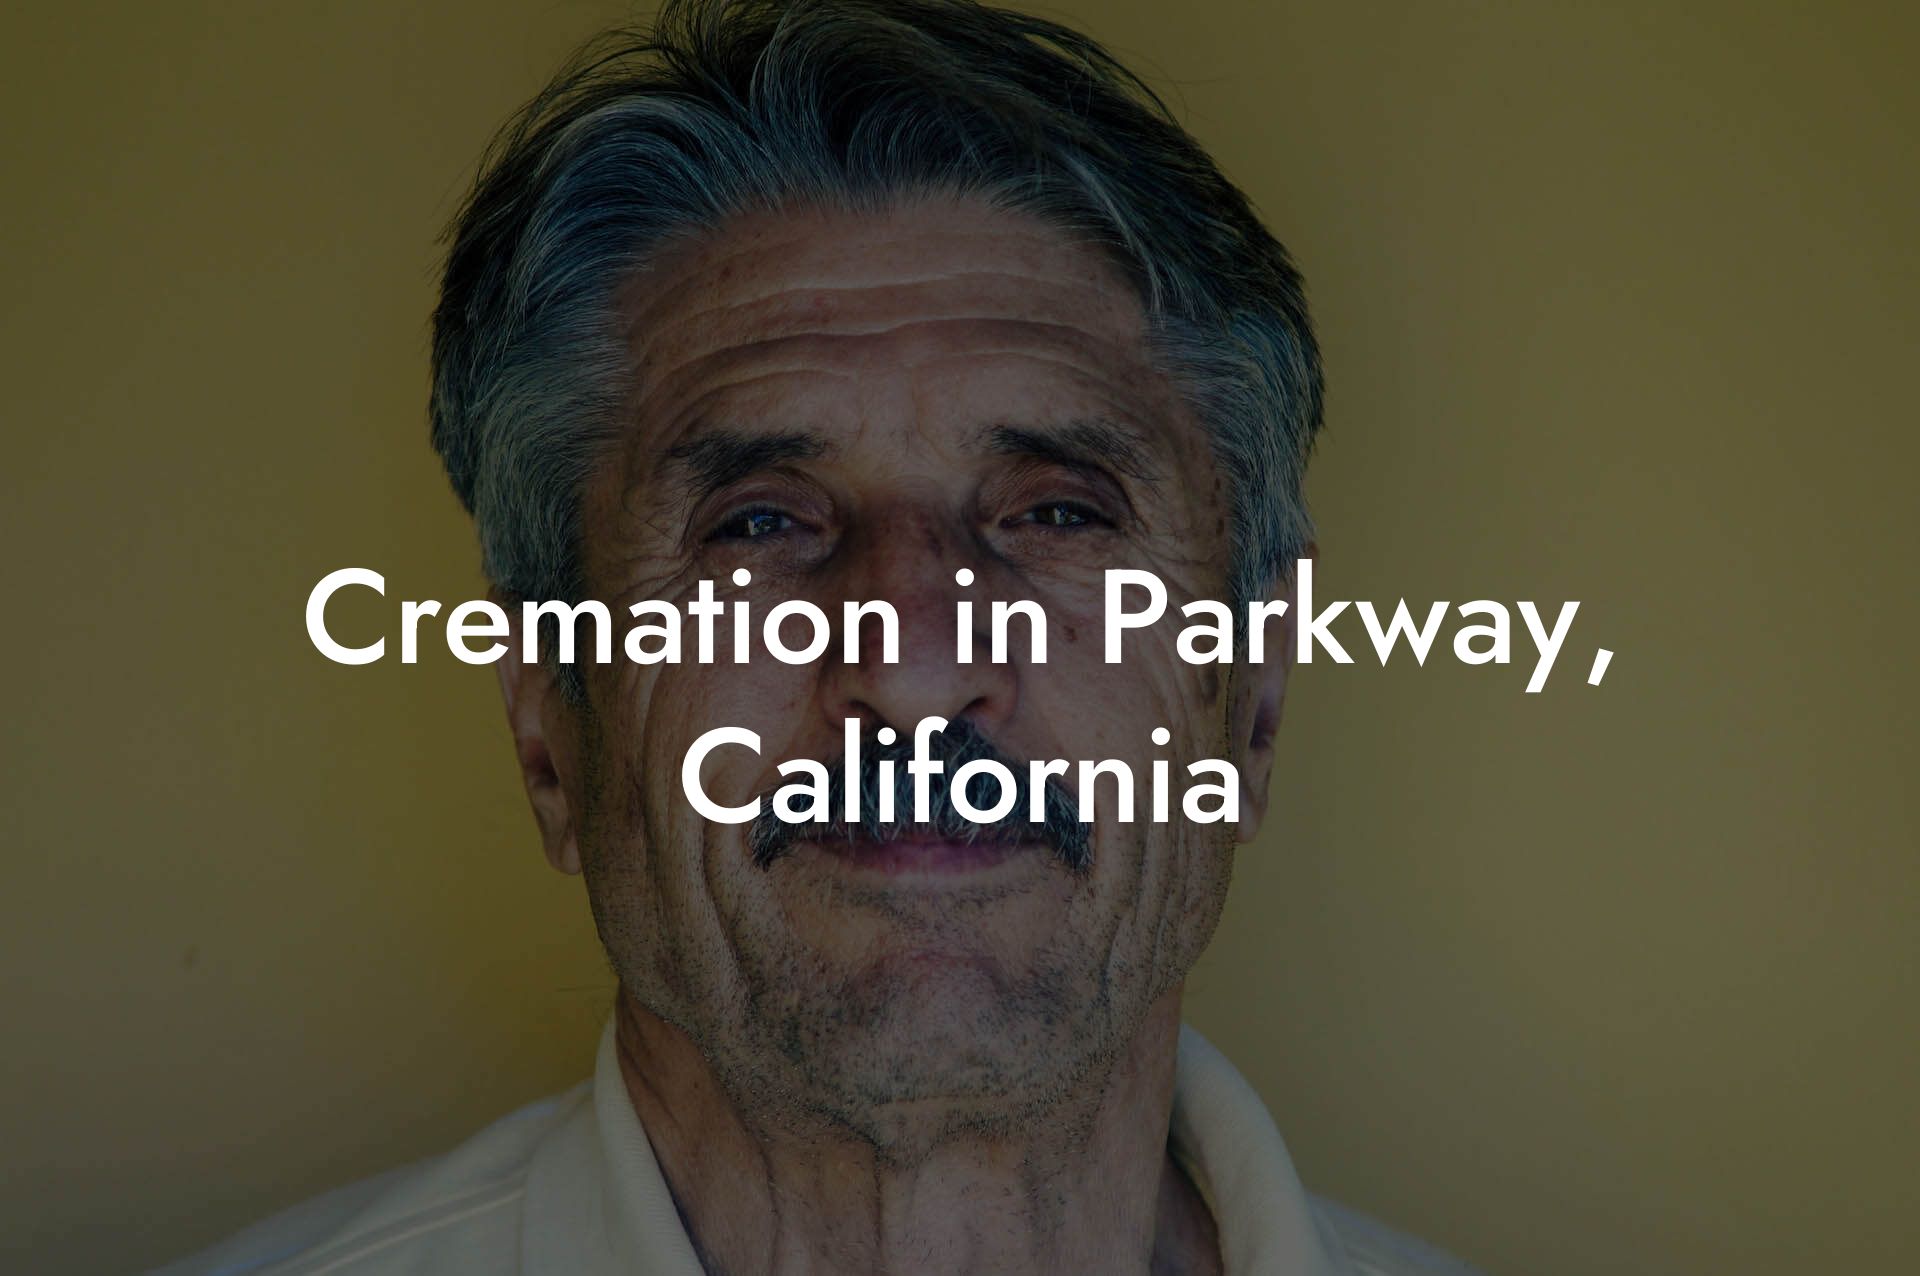 Cremation in Parkway, California